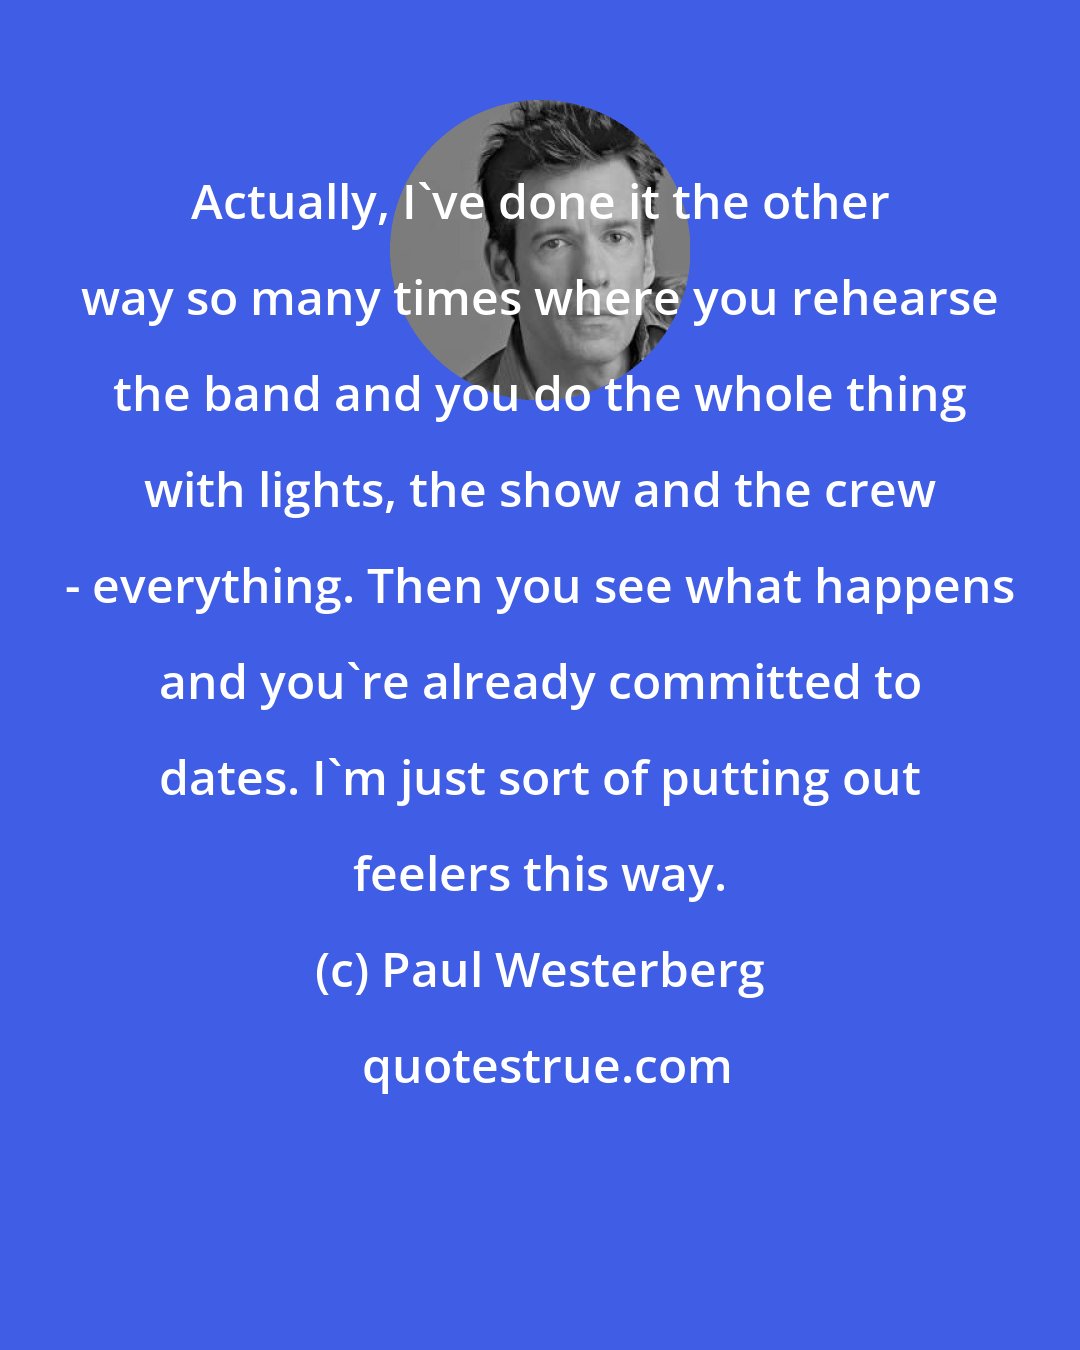 Paul Westerberg: Actually, I've done it the other way so many times where you rehearse the band and you do the whole thing with lights, the show and the crew - everything. Then you see what happens and you're already committed to dates. I'm just sort of putting out feelers this way.